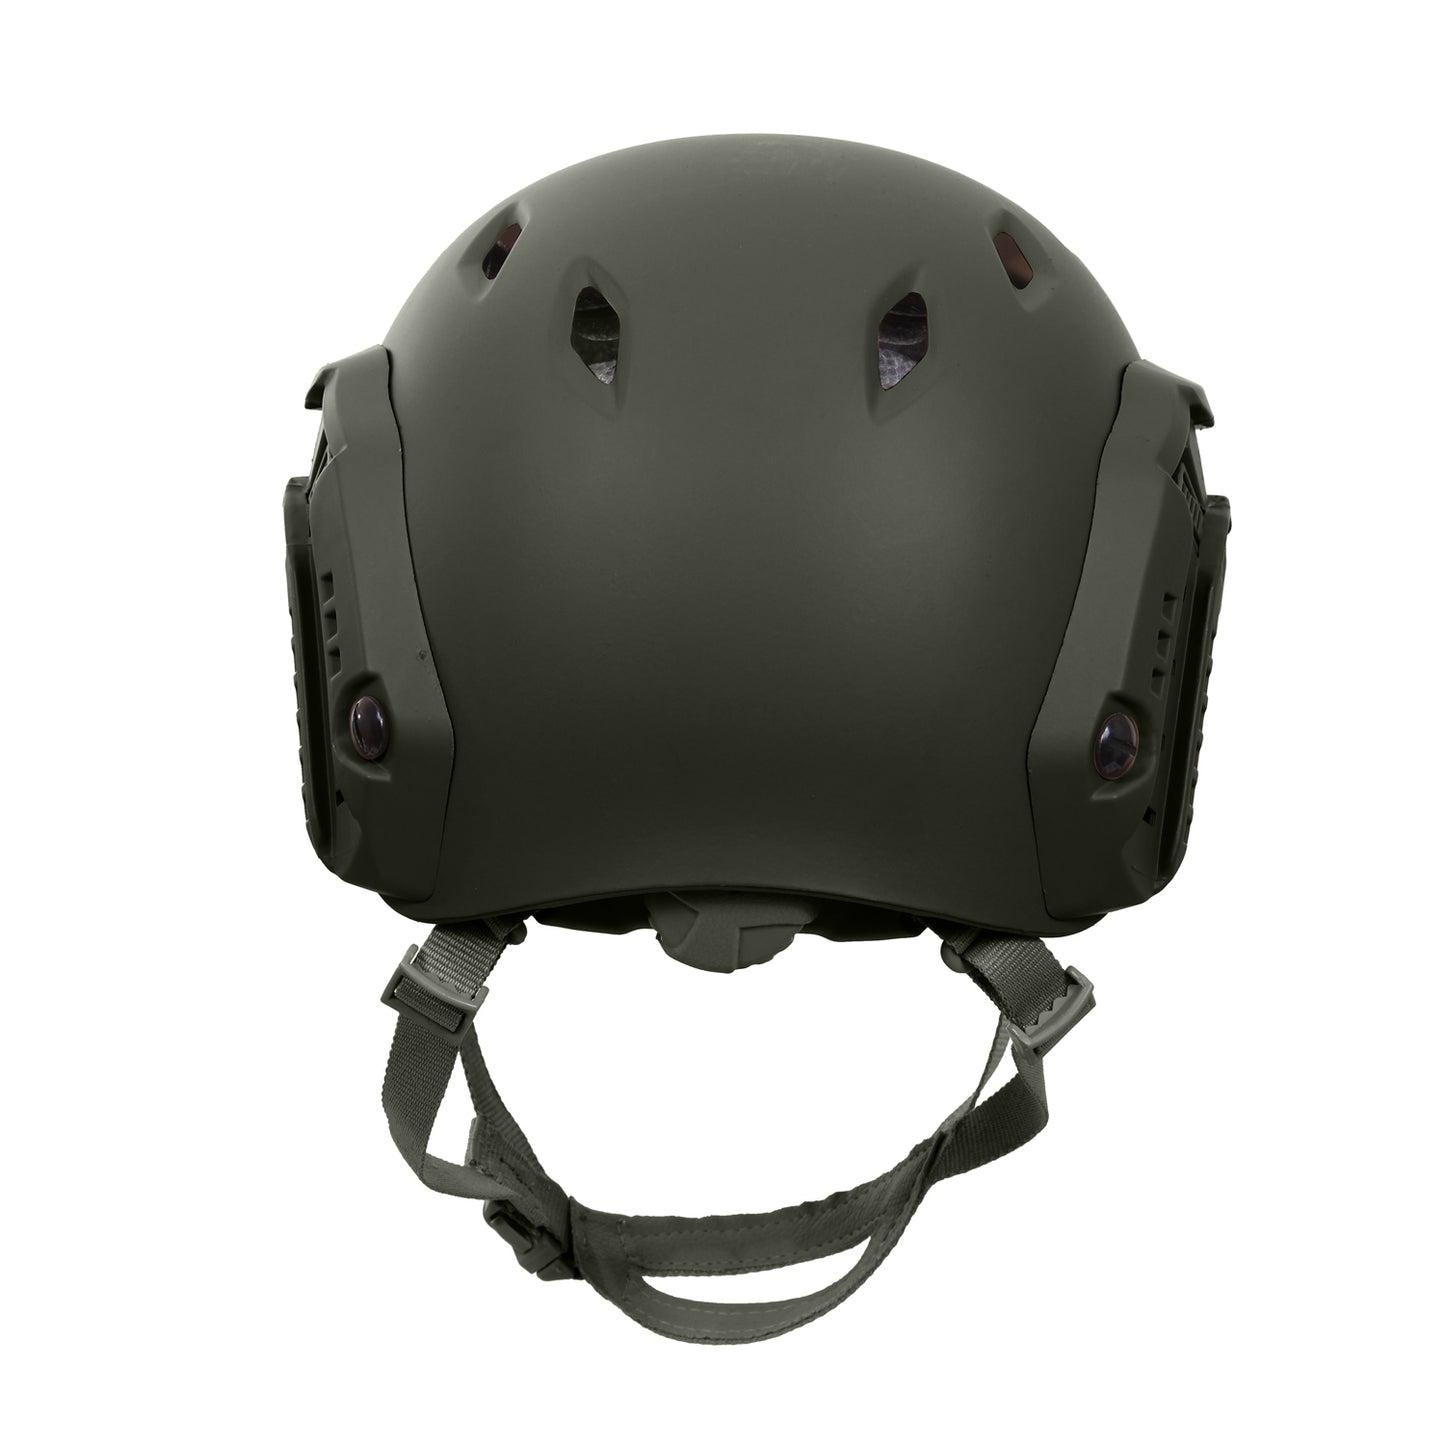 Designed for the tactical enthusiast, Rothco’s Advanced Tactical Adjustable Airsoft Helmet is the perfect addition to any airsoft loadout or non-ballistic tactical training exercise. The Lightweight design decreases head and neck fatigue while supporting optics, video recording devices, and flashlights. 